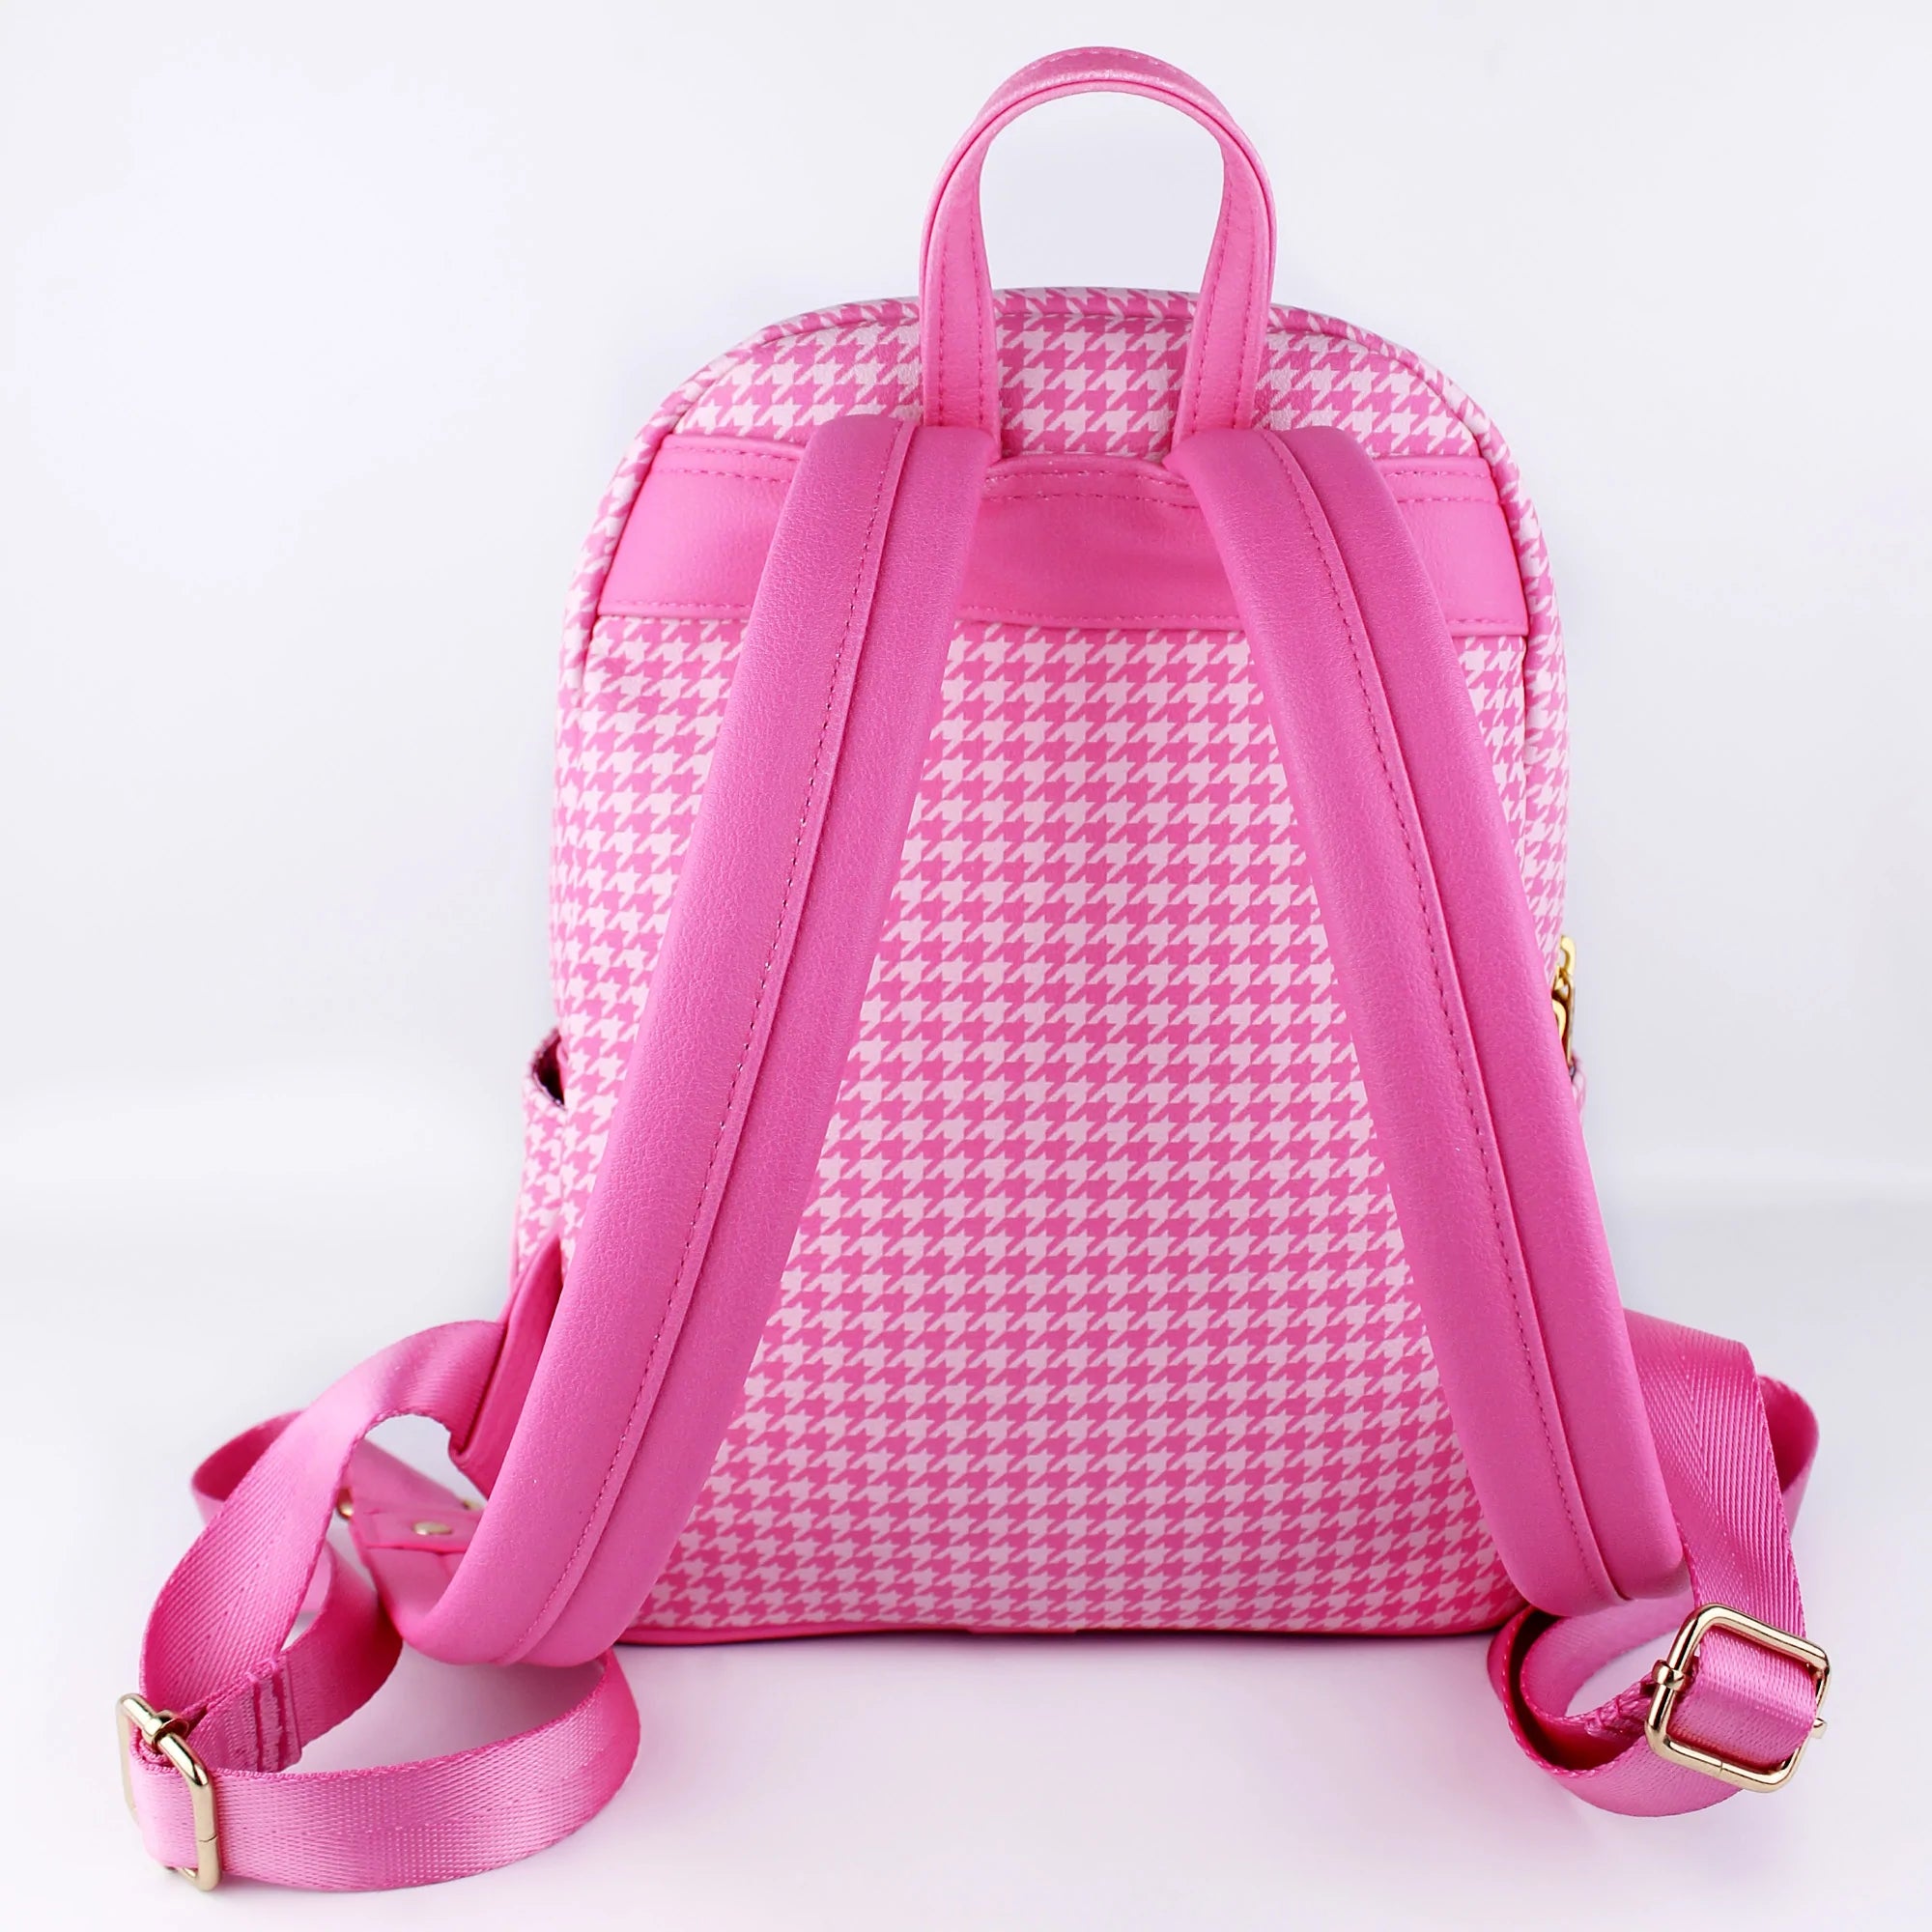 Powerpuff Girls Houndstooth Mini Backpack - Cakeworthy [Last Available]